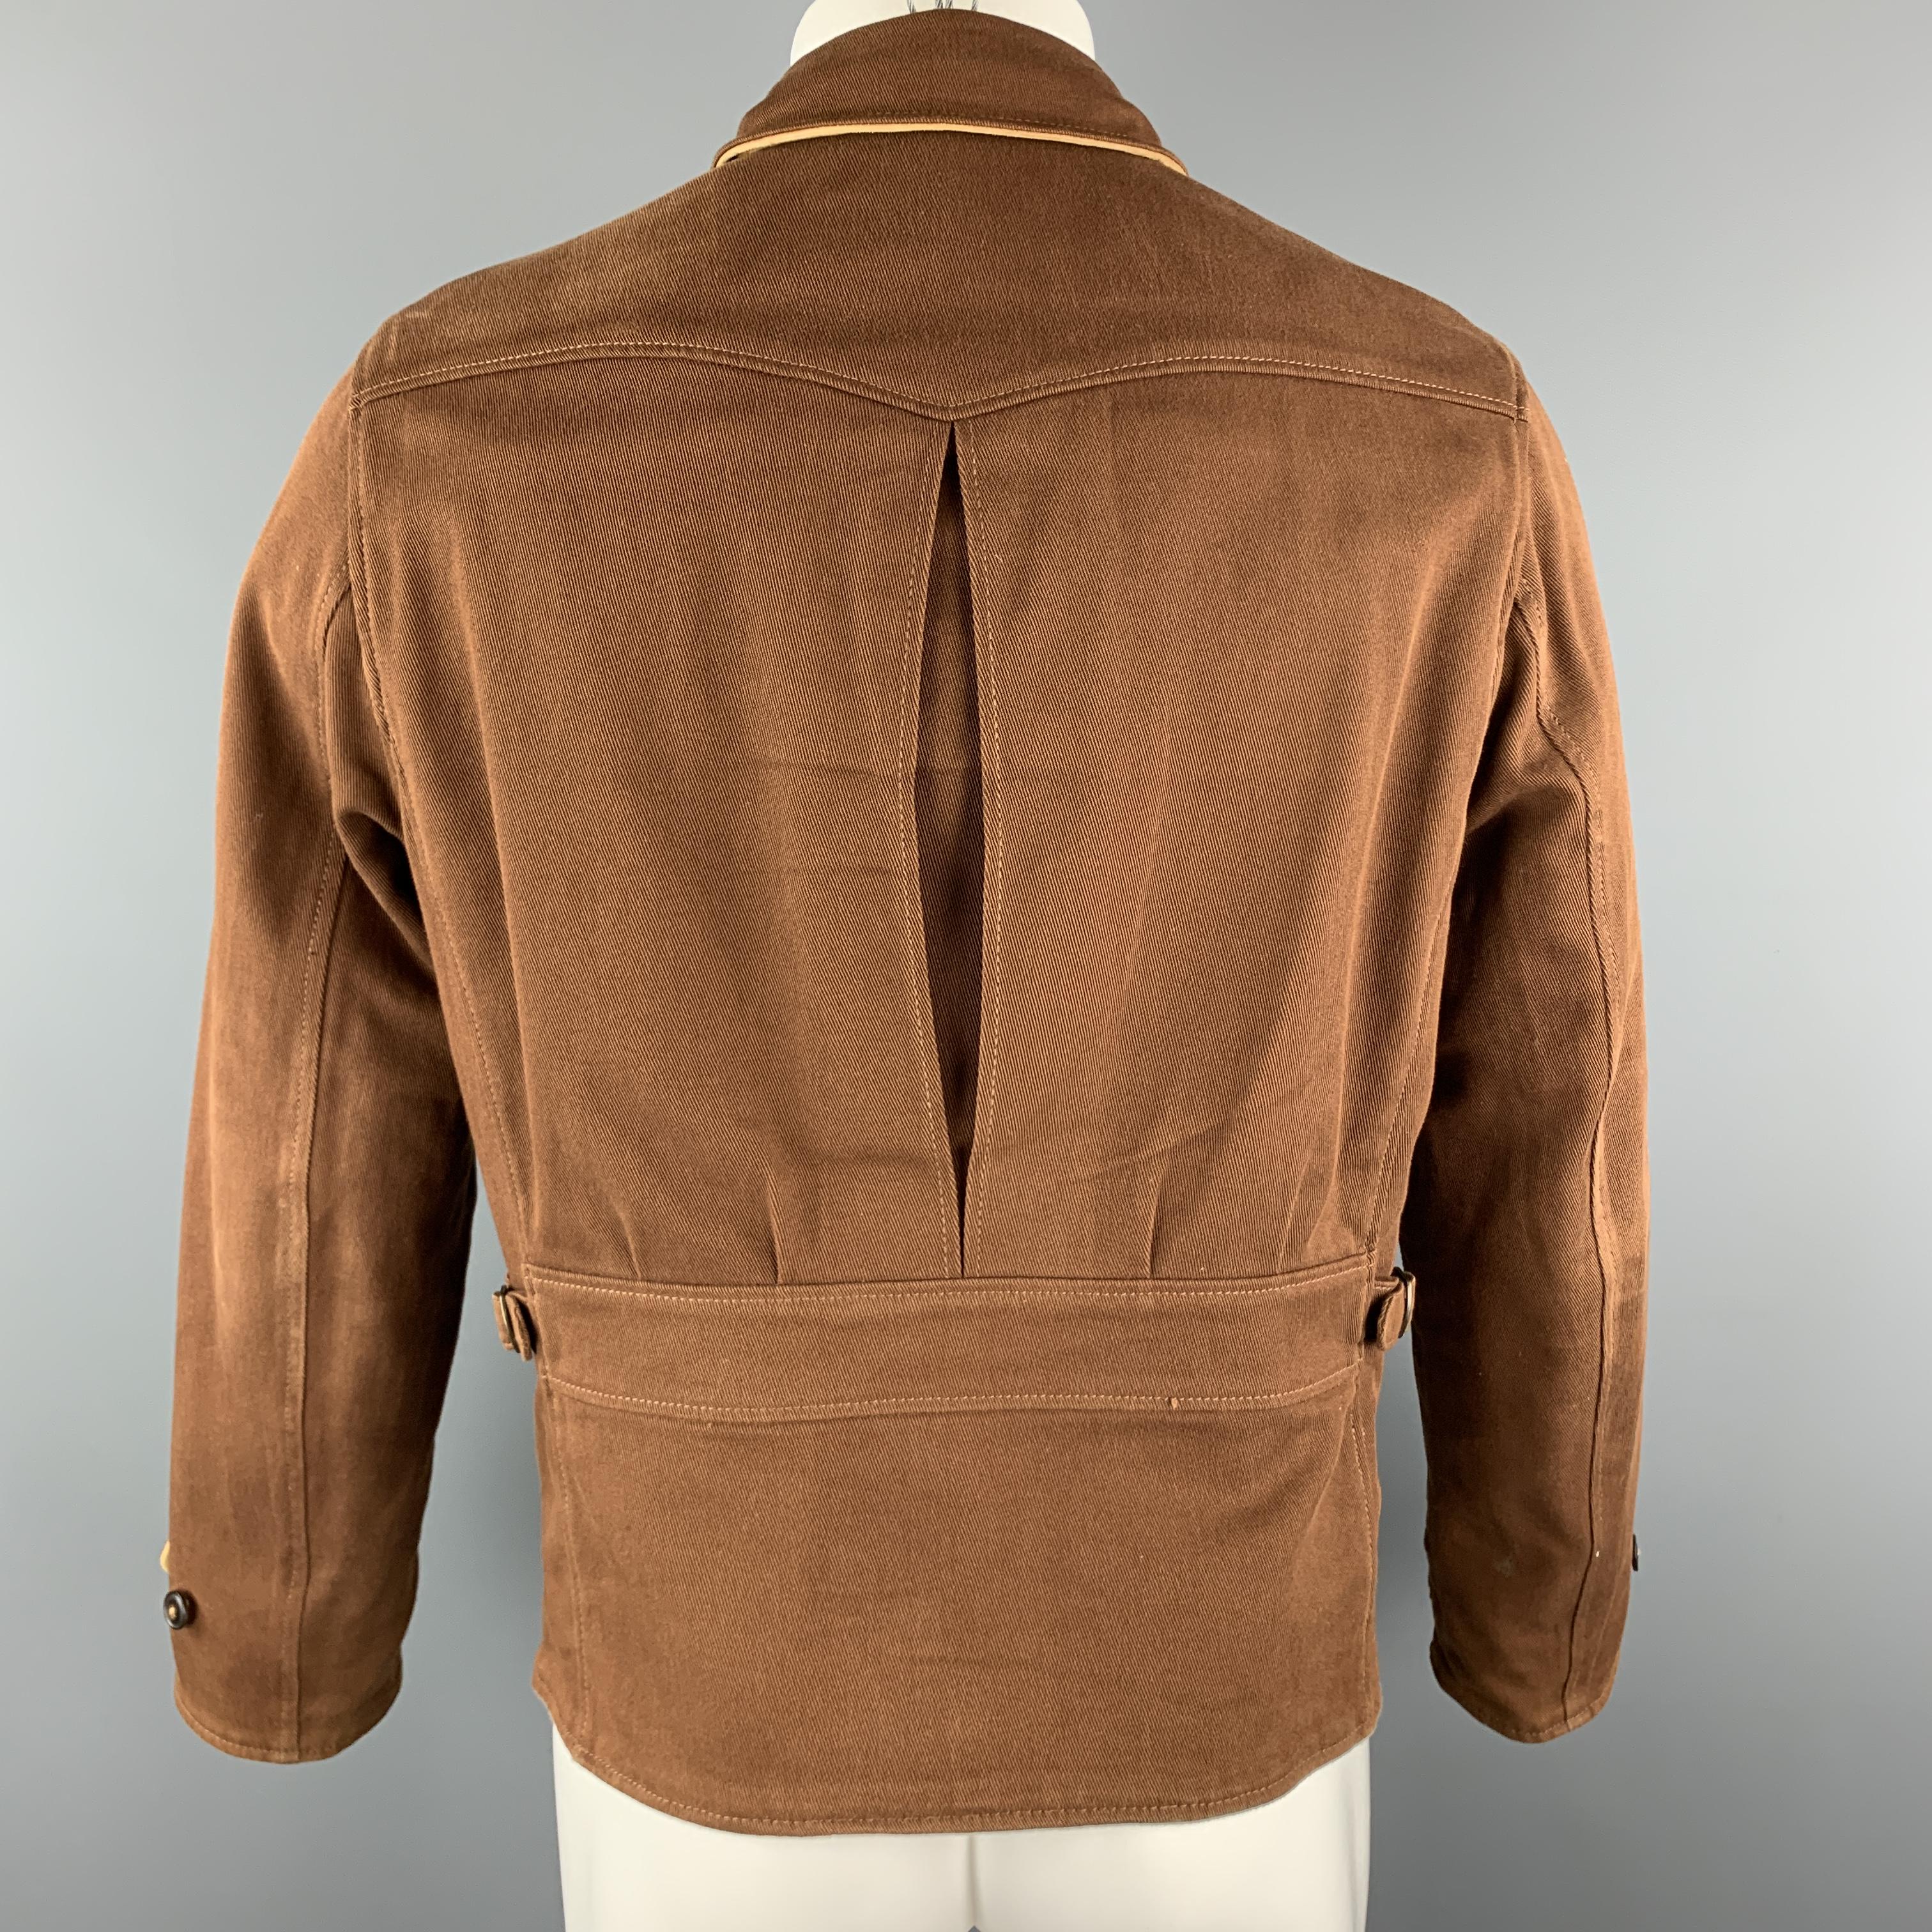 Men's POLO by RALPH LAUREN Size M Tan Distressed Leather Brown Twill Reversible Jacket